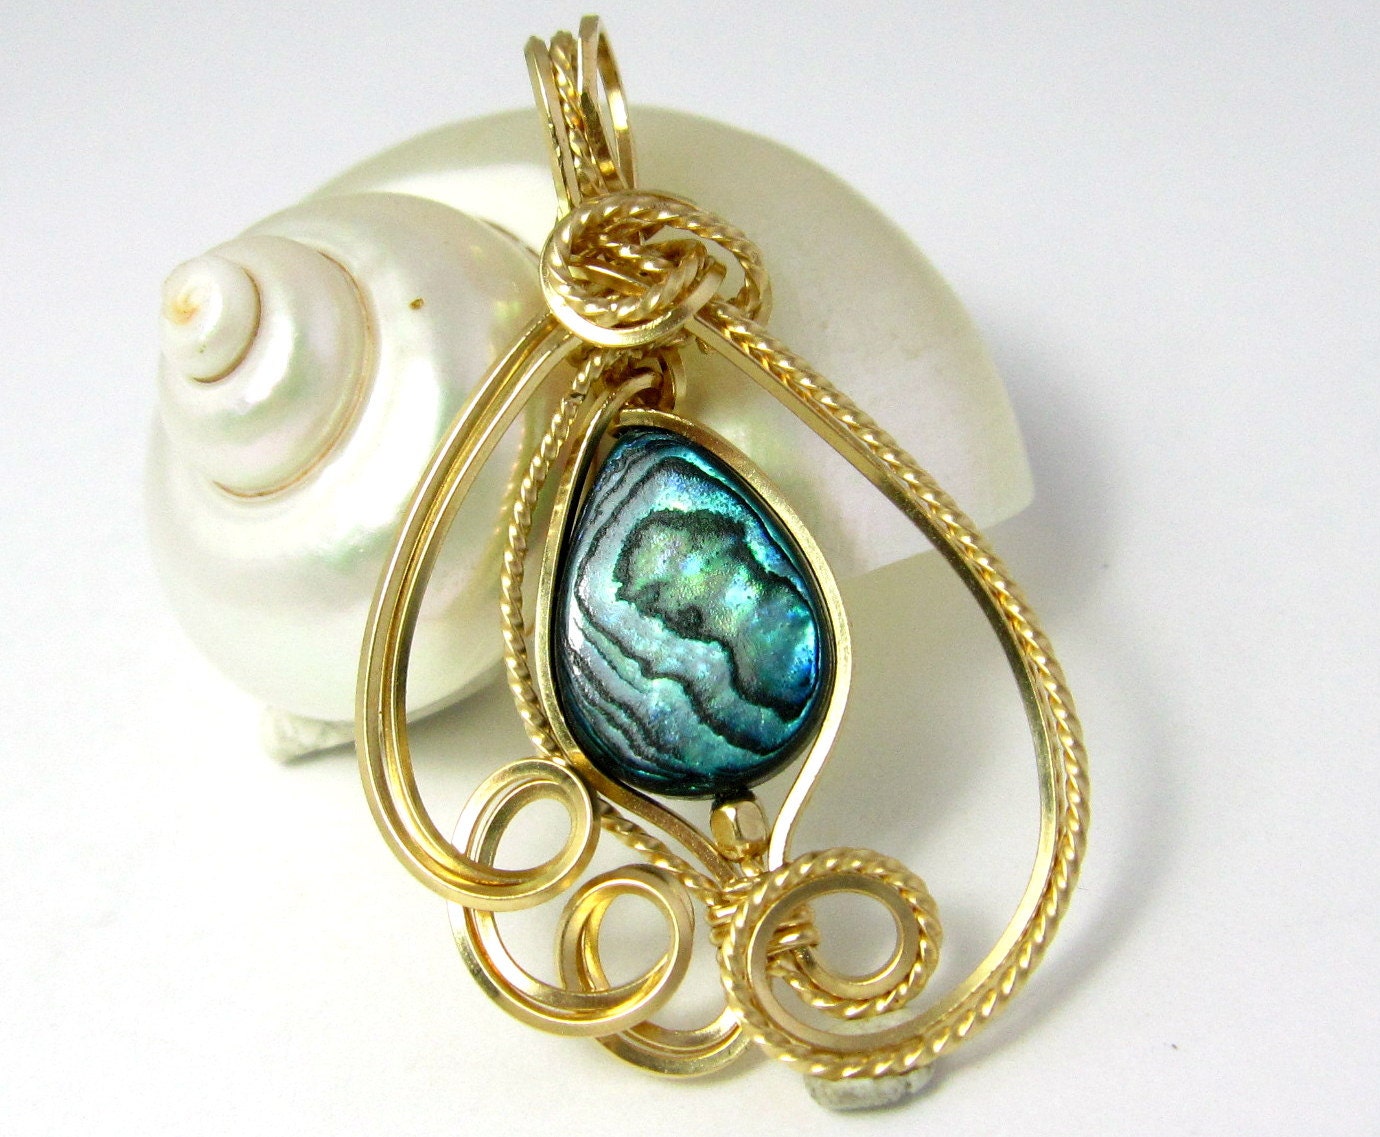 Paua Abalone Gold Pendant, 14k Gold Filled Gemstone Pendant Iridescent Necklace Gift For Her - LeesEarringBoutique